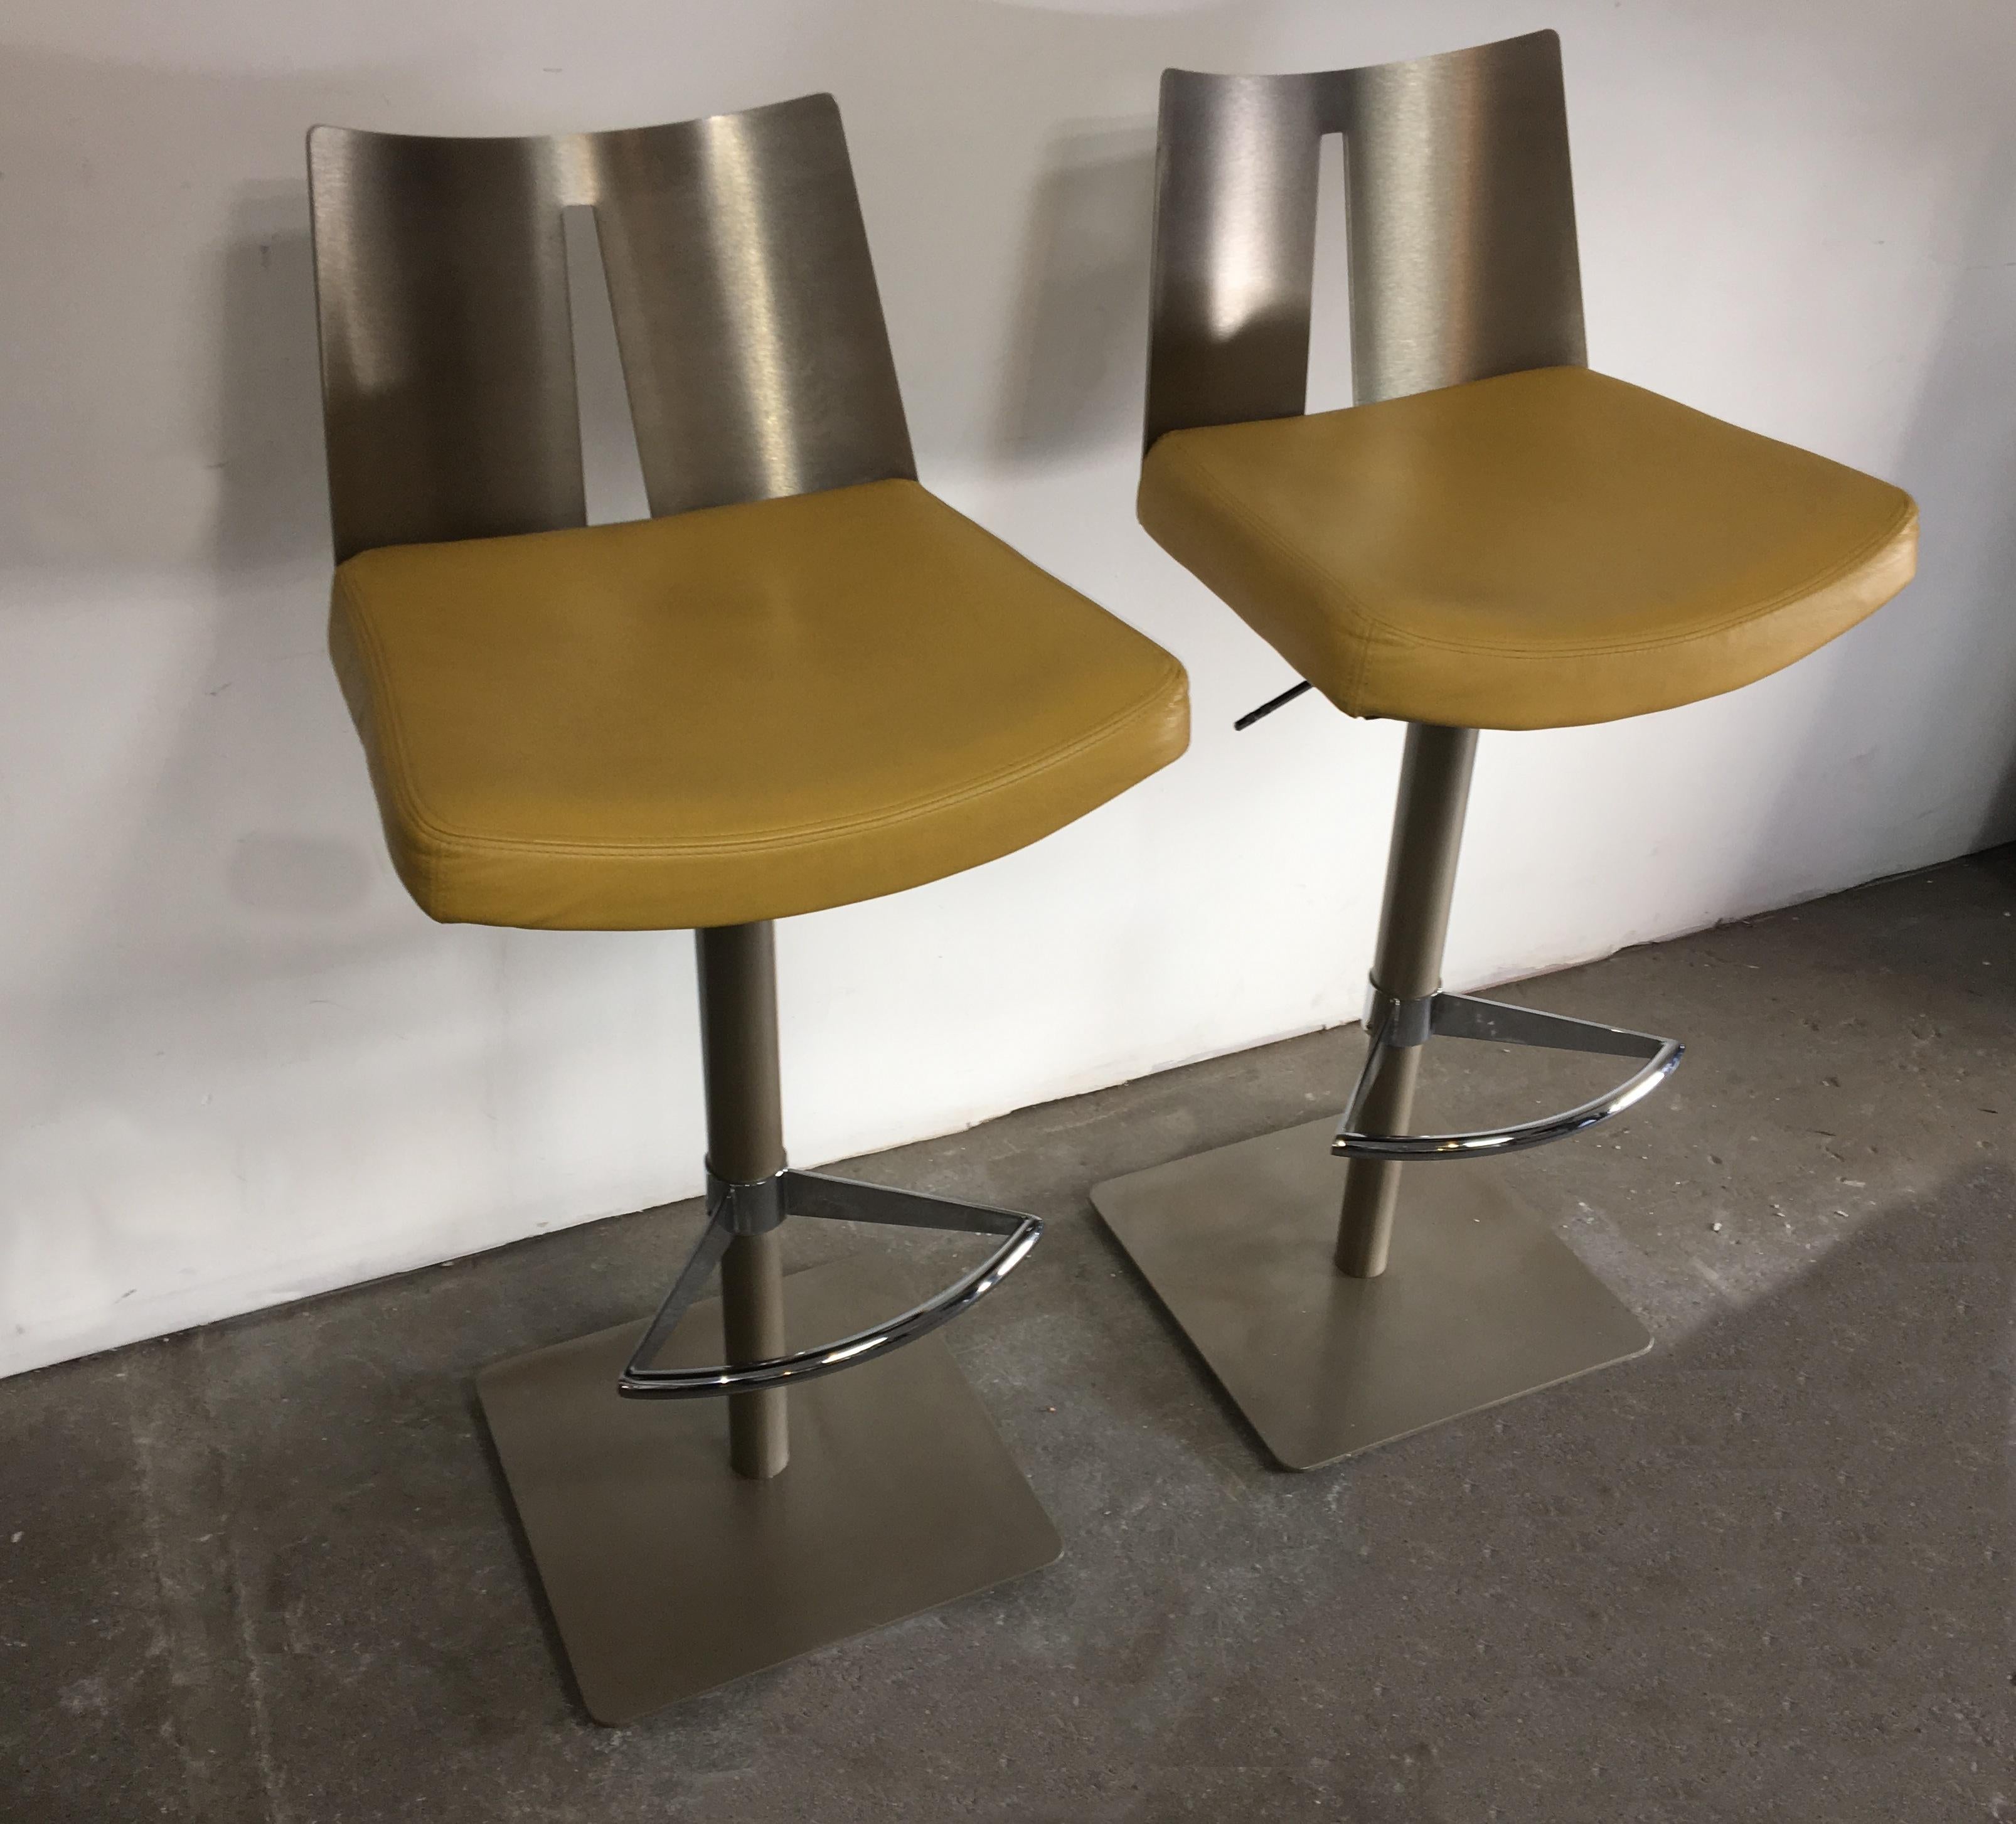 Pair of height-adjustable swivel bar stools.
As you can see on the picture, to adjust the height of the stool, the bottom part under the footrest, becomes shorter. 

Grey powder-coated steel base and column.
Shiny polished steel footrest and